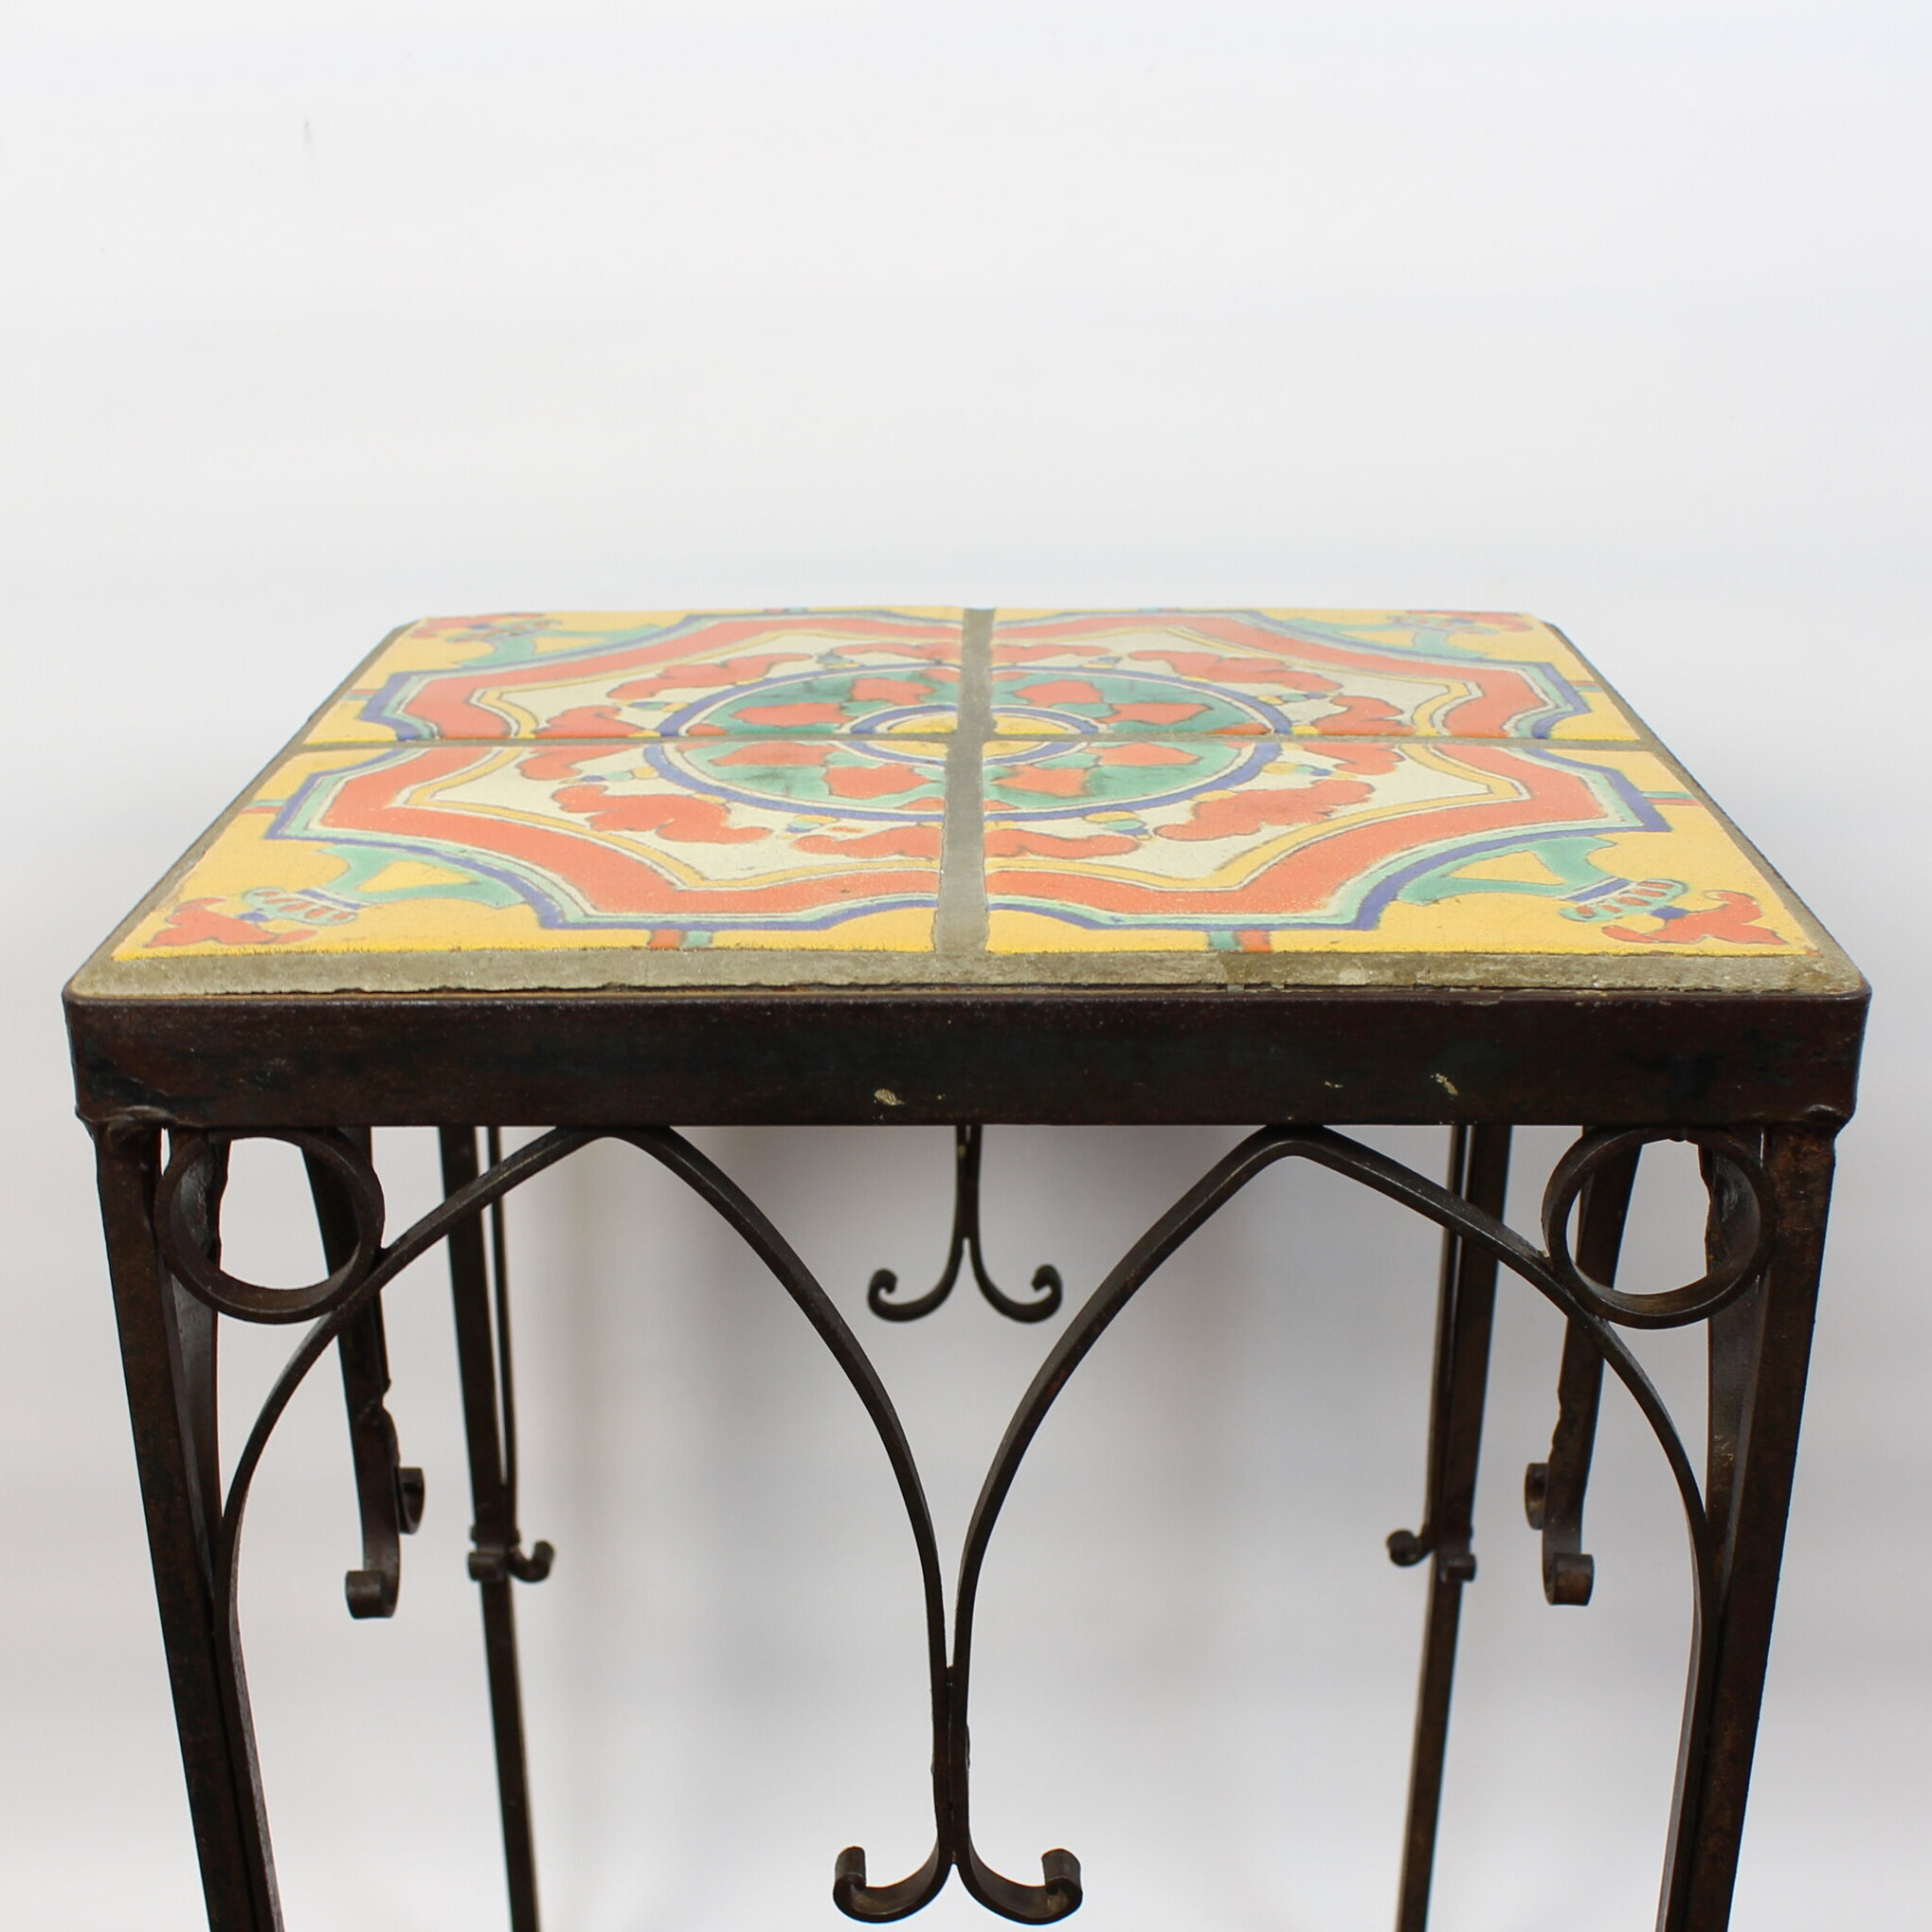 SOLD, D&amp;M Tile Top Wrought Iron Table